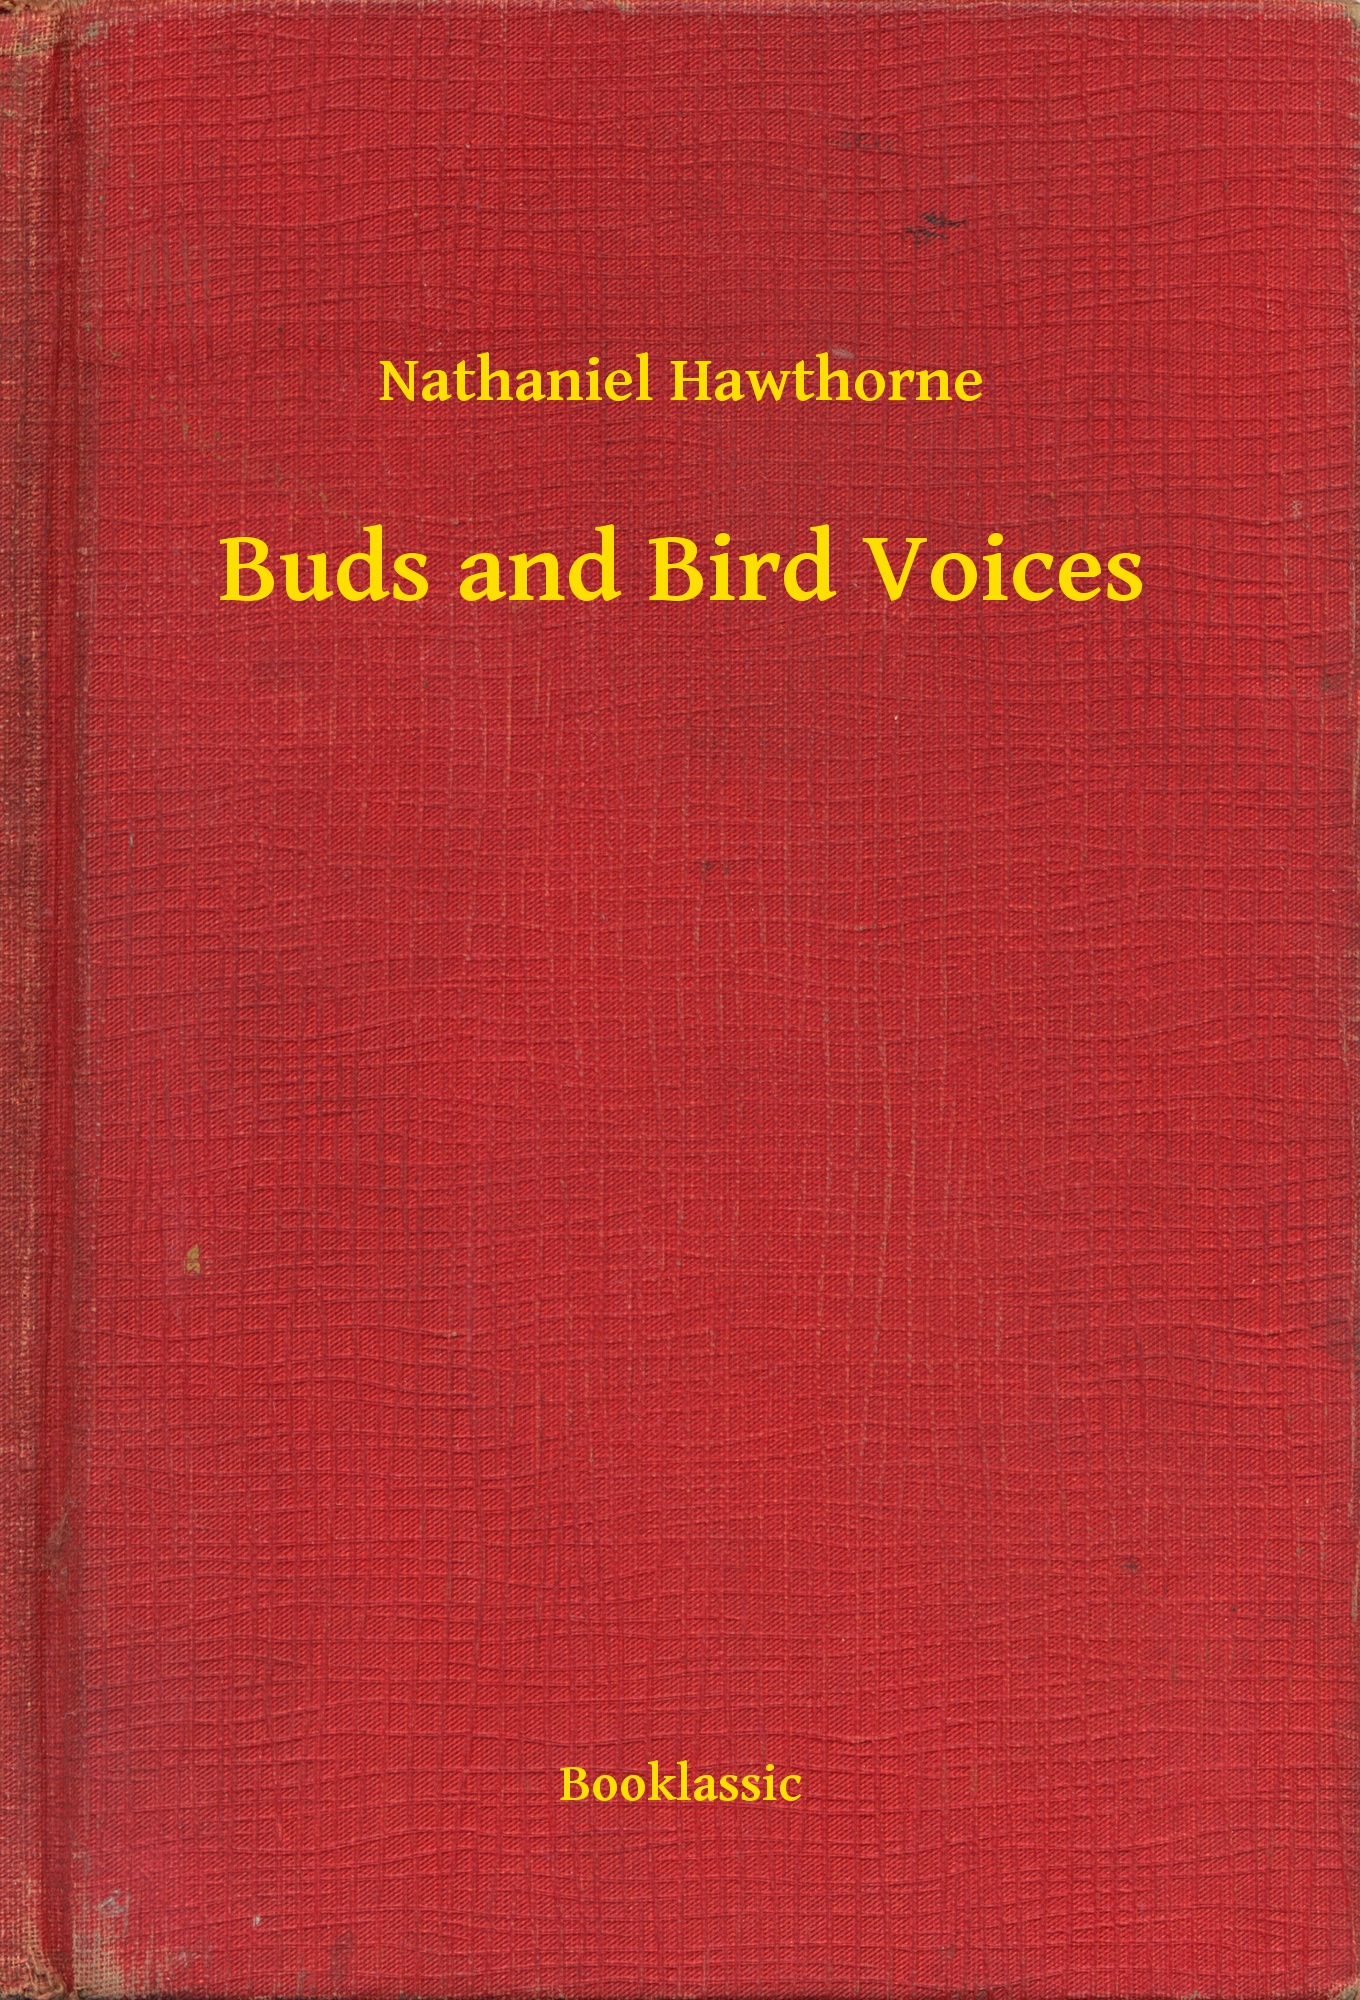 Buds and Bird Voices